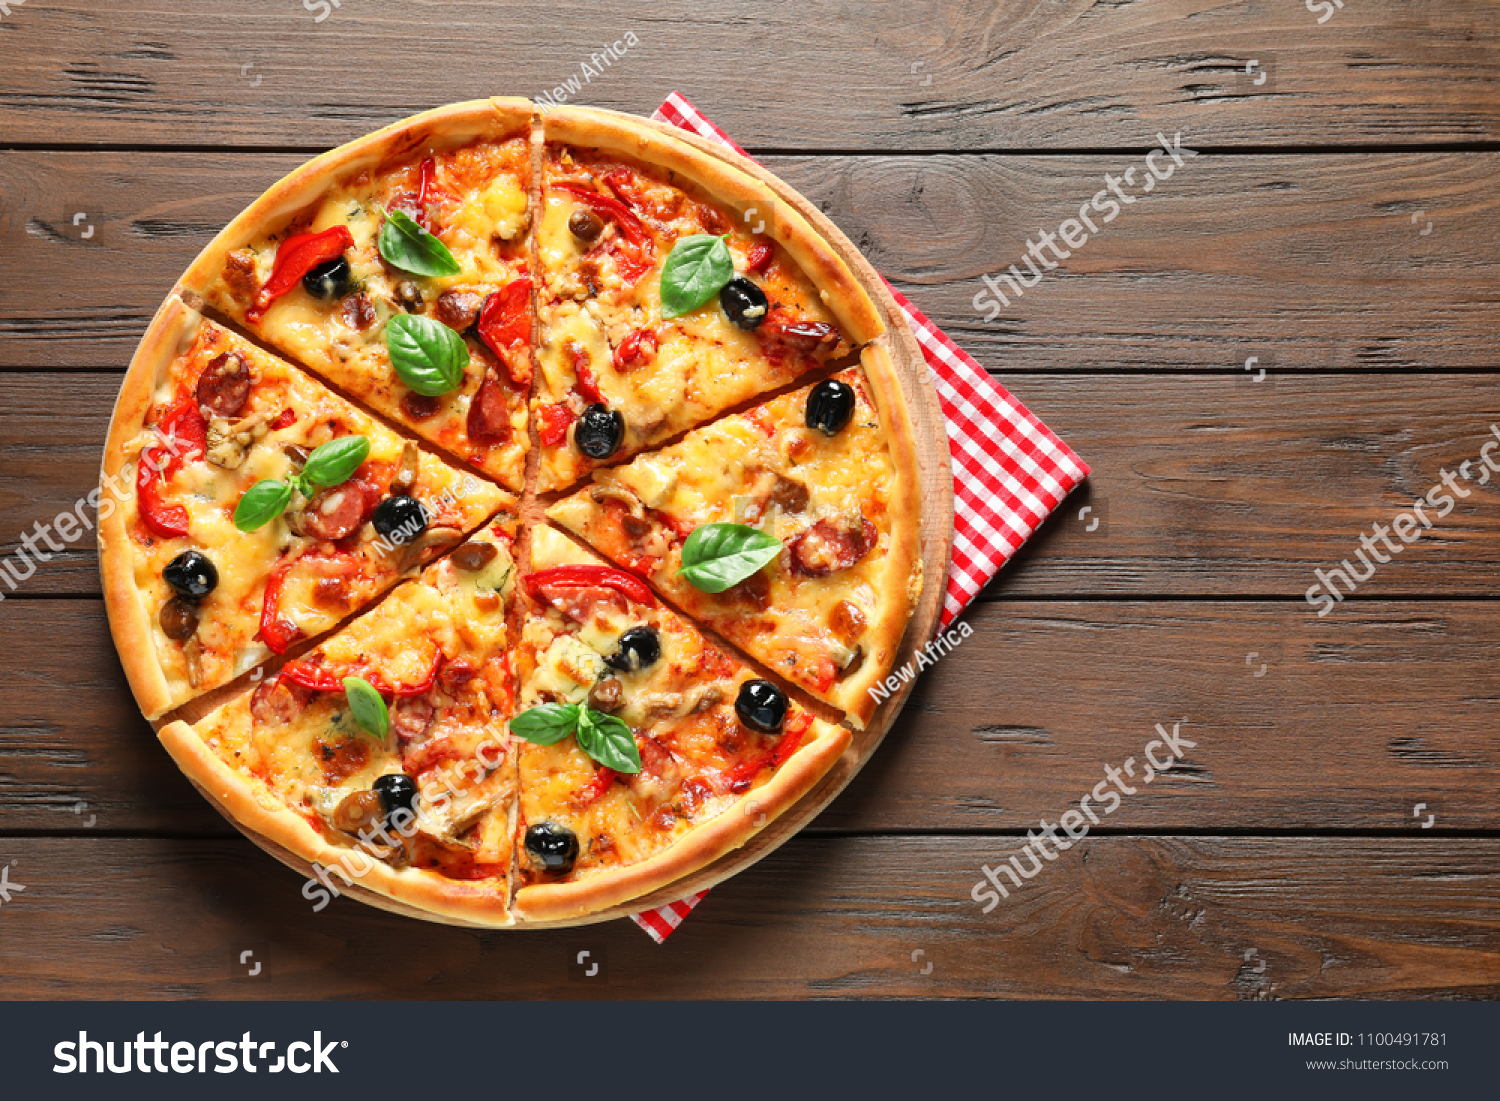 Delicious pizza with olives and sausages on wooden table, top view #1100491781